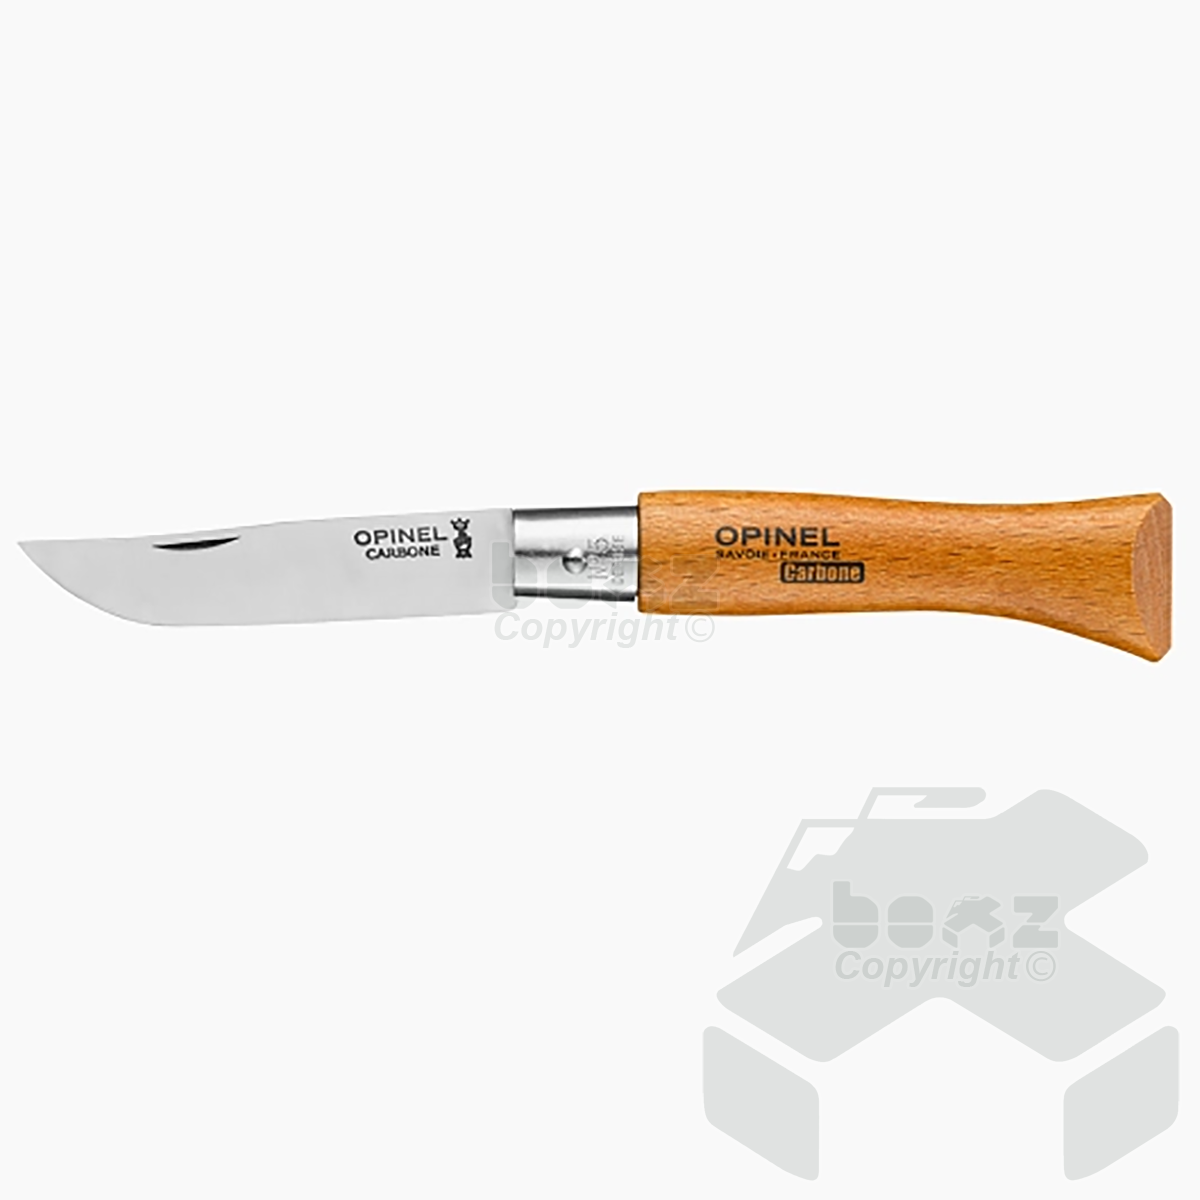 Opinel Number 5 Stainless Steel Knife